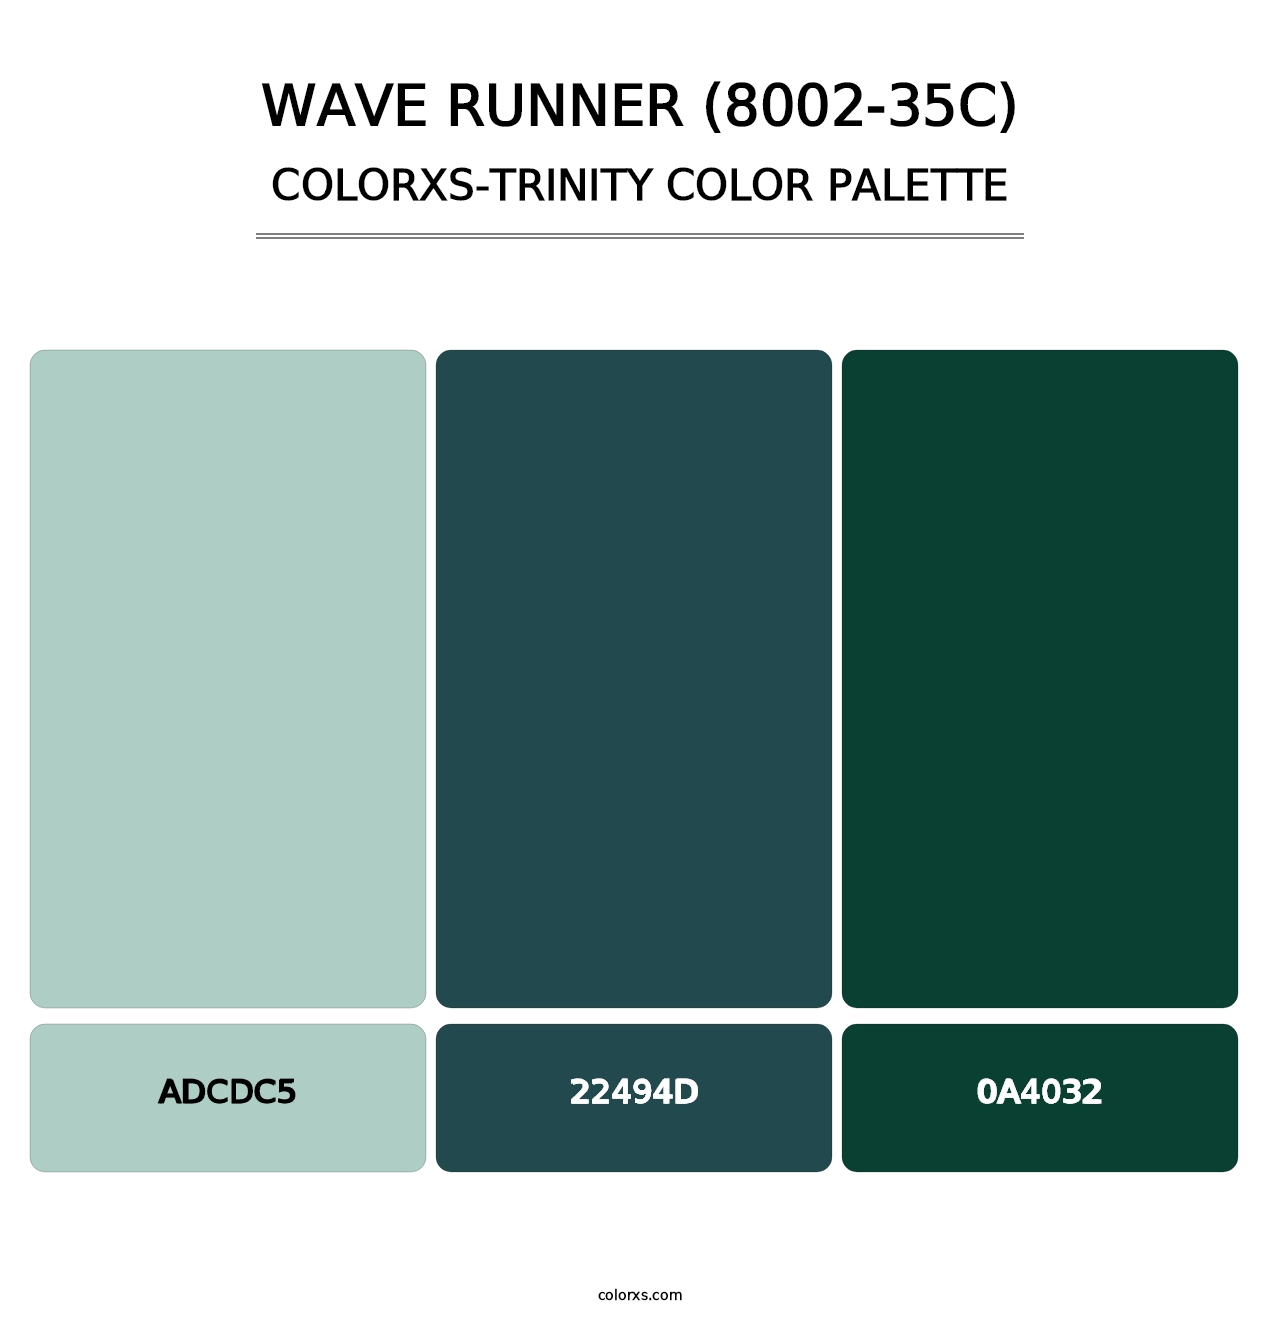 Wave Runner (8002-35C) - Colorxs Trinity Palette